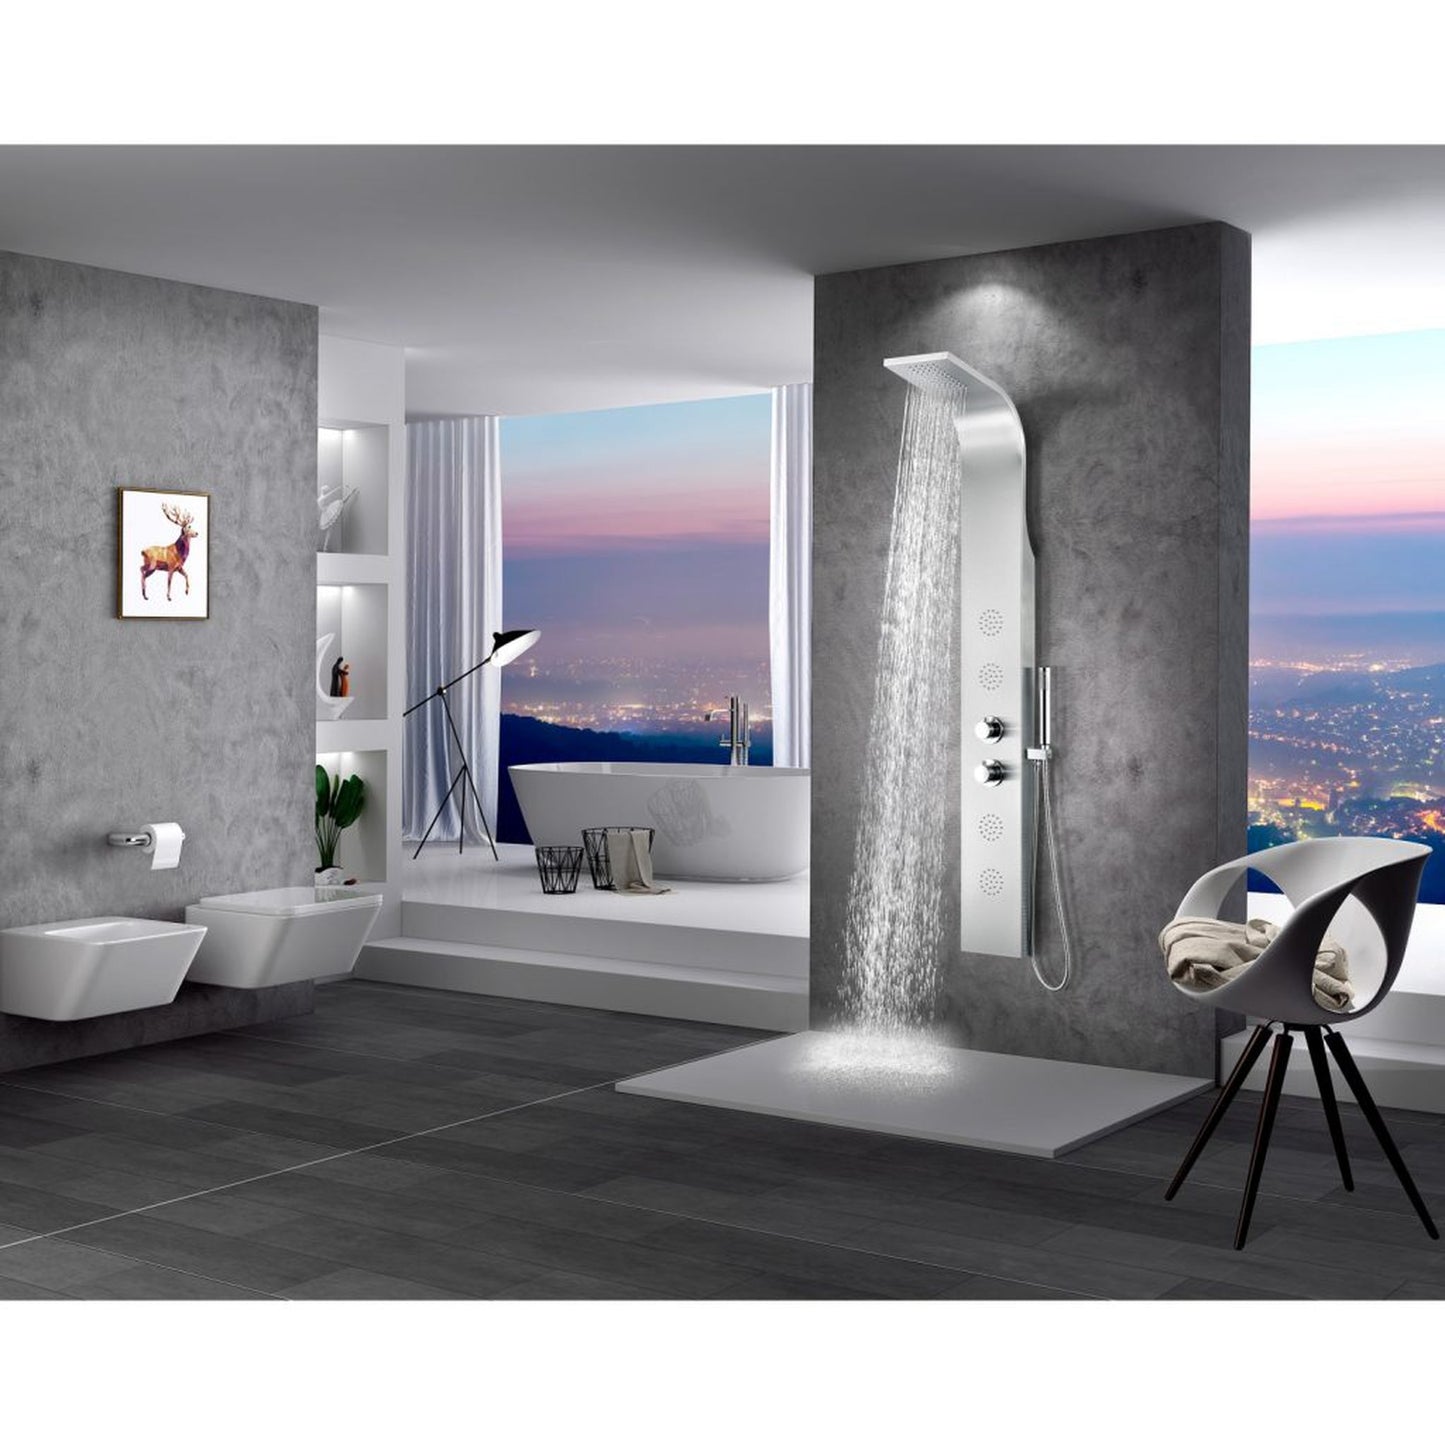 ANZZI Mayor Series 64" Brushed Stainless Steel 4-Jetted Full Body Shower Panel With Heavy Rain Shower Head and Euro-Grip Hand Sprayer